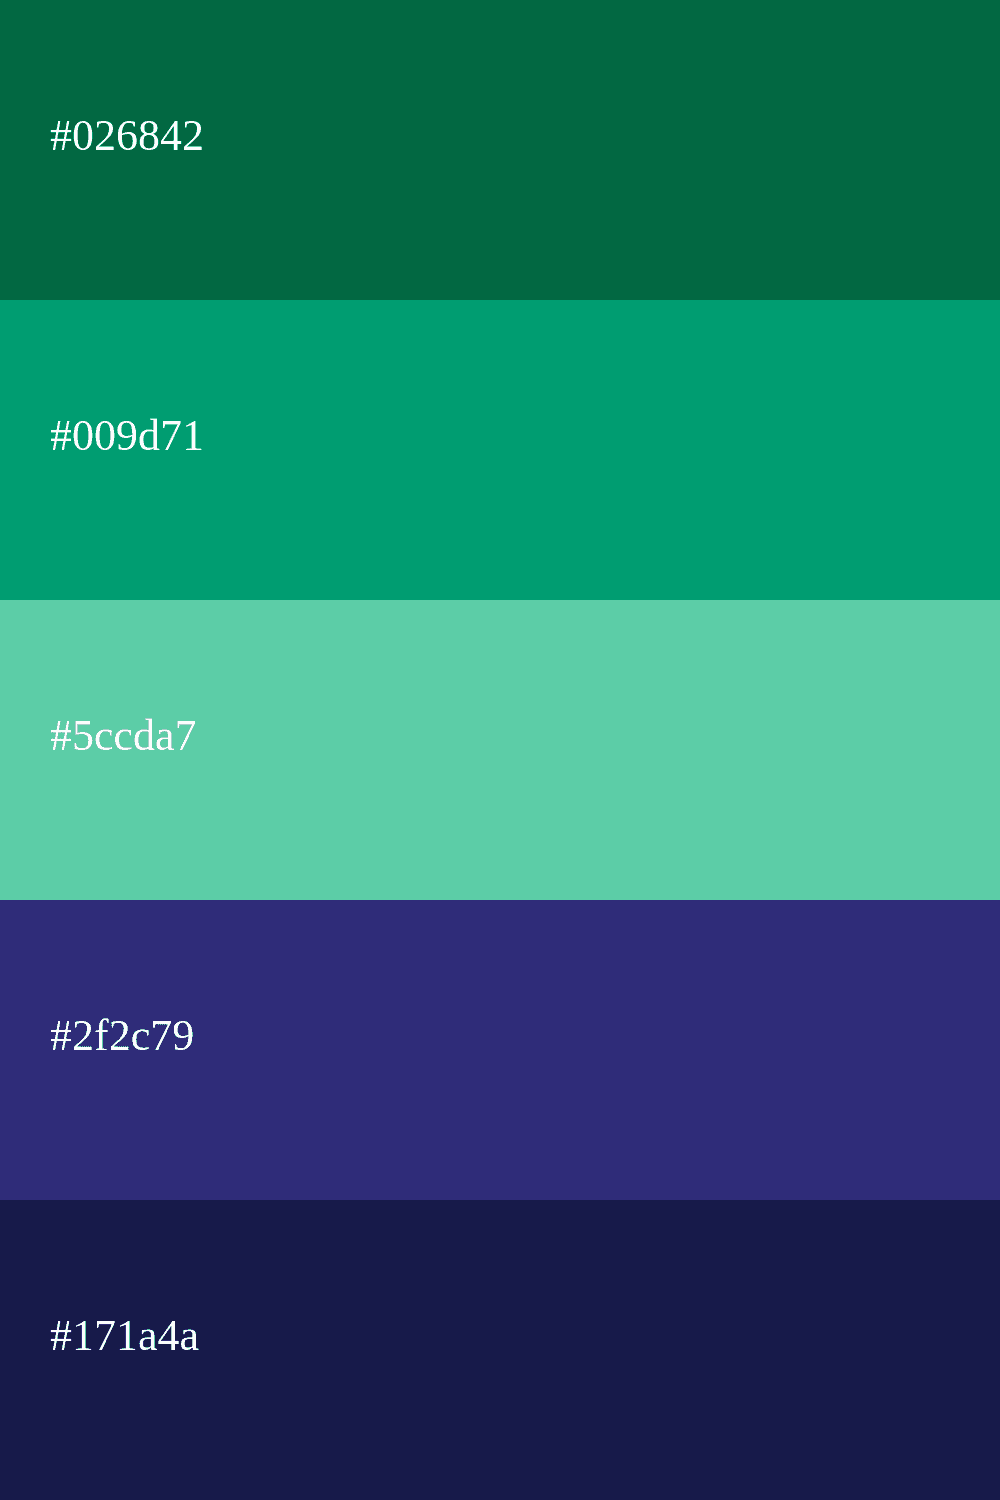 emerald and navy blue